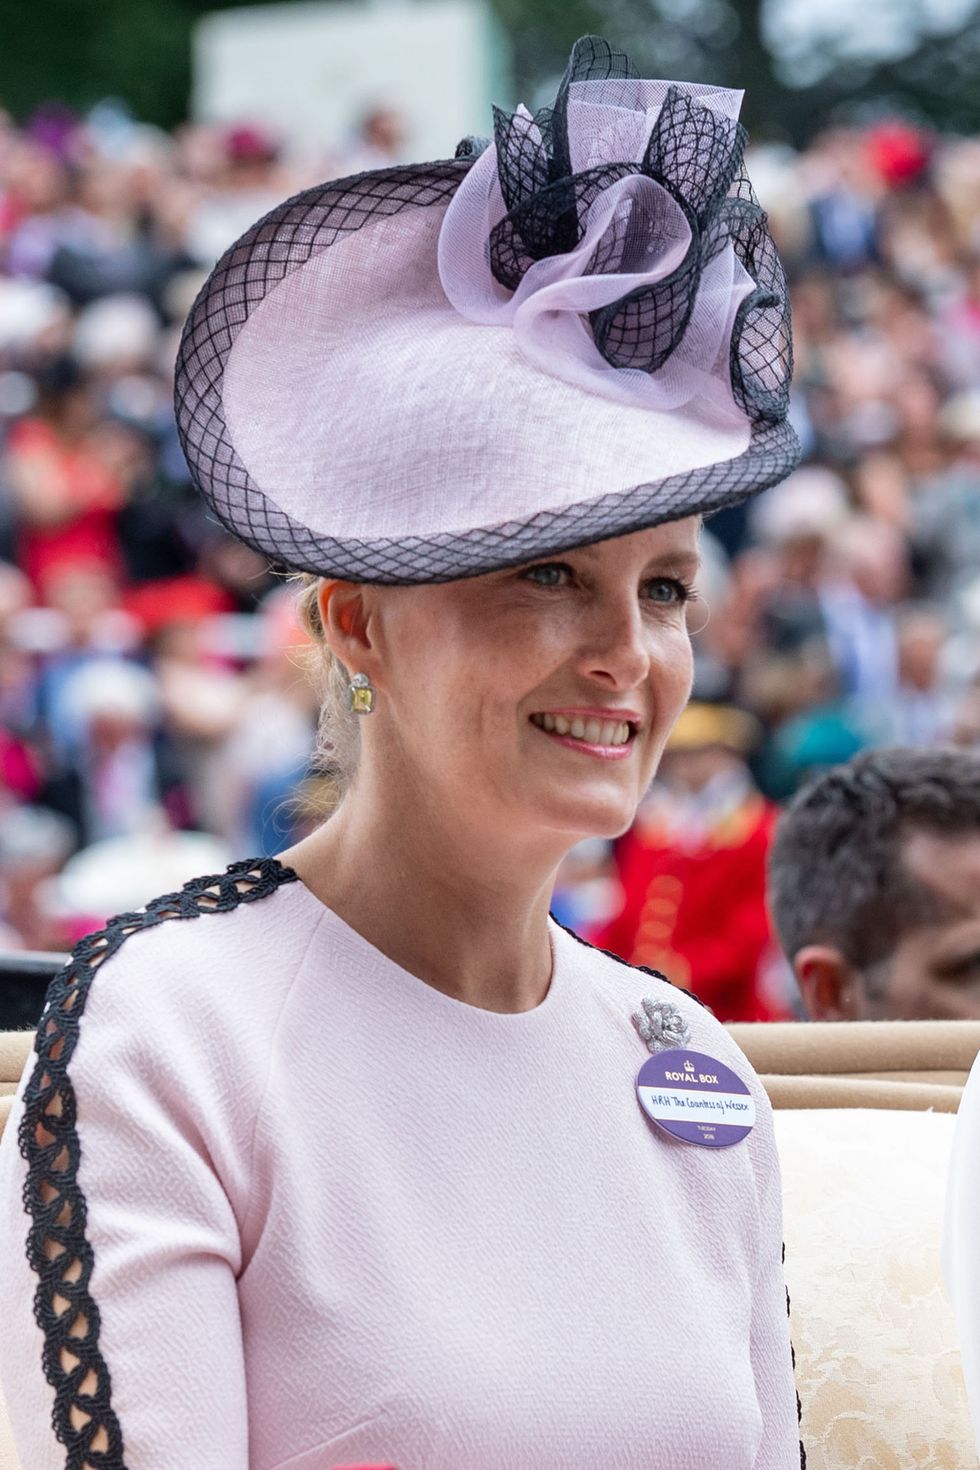 https://hips.hearstapps.com/hmg-prod.s3.amazonaws.com/images/hbz-royal-ascot-hats-sophie-countess-of-wessex-gettyimages-978627966-1529432843.jpg?crop=1xw:1xh;center,top&resize=980:*